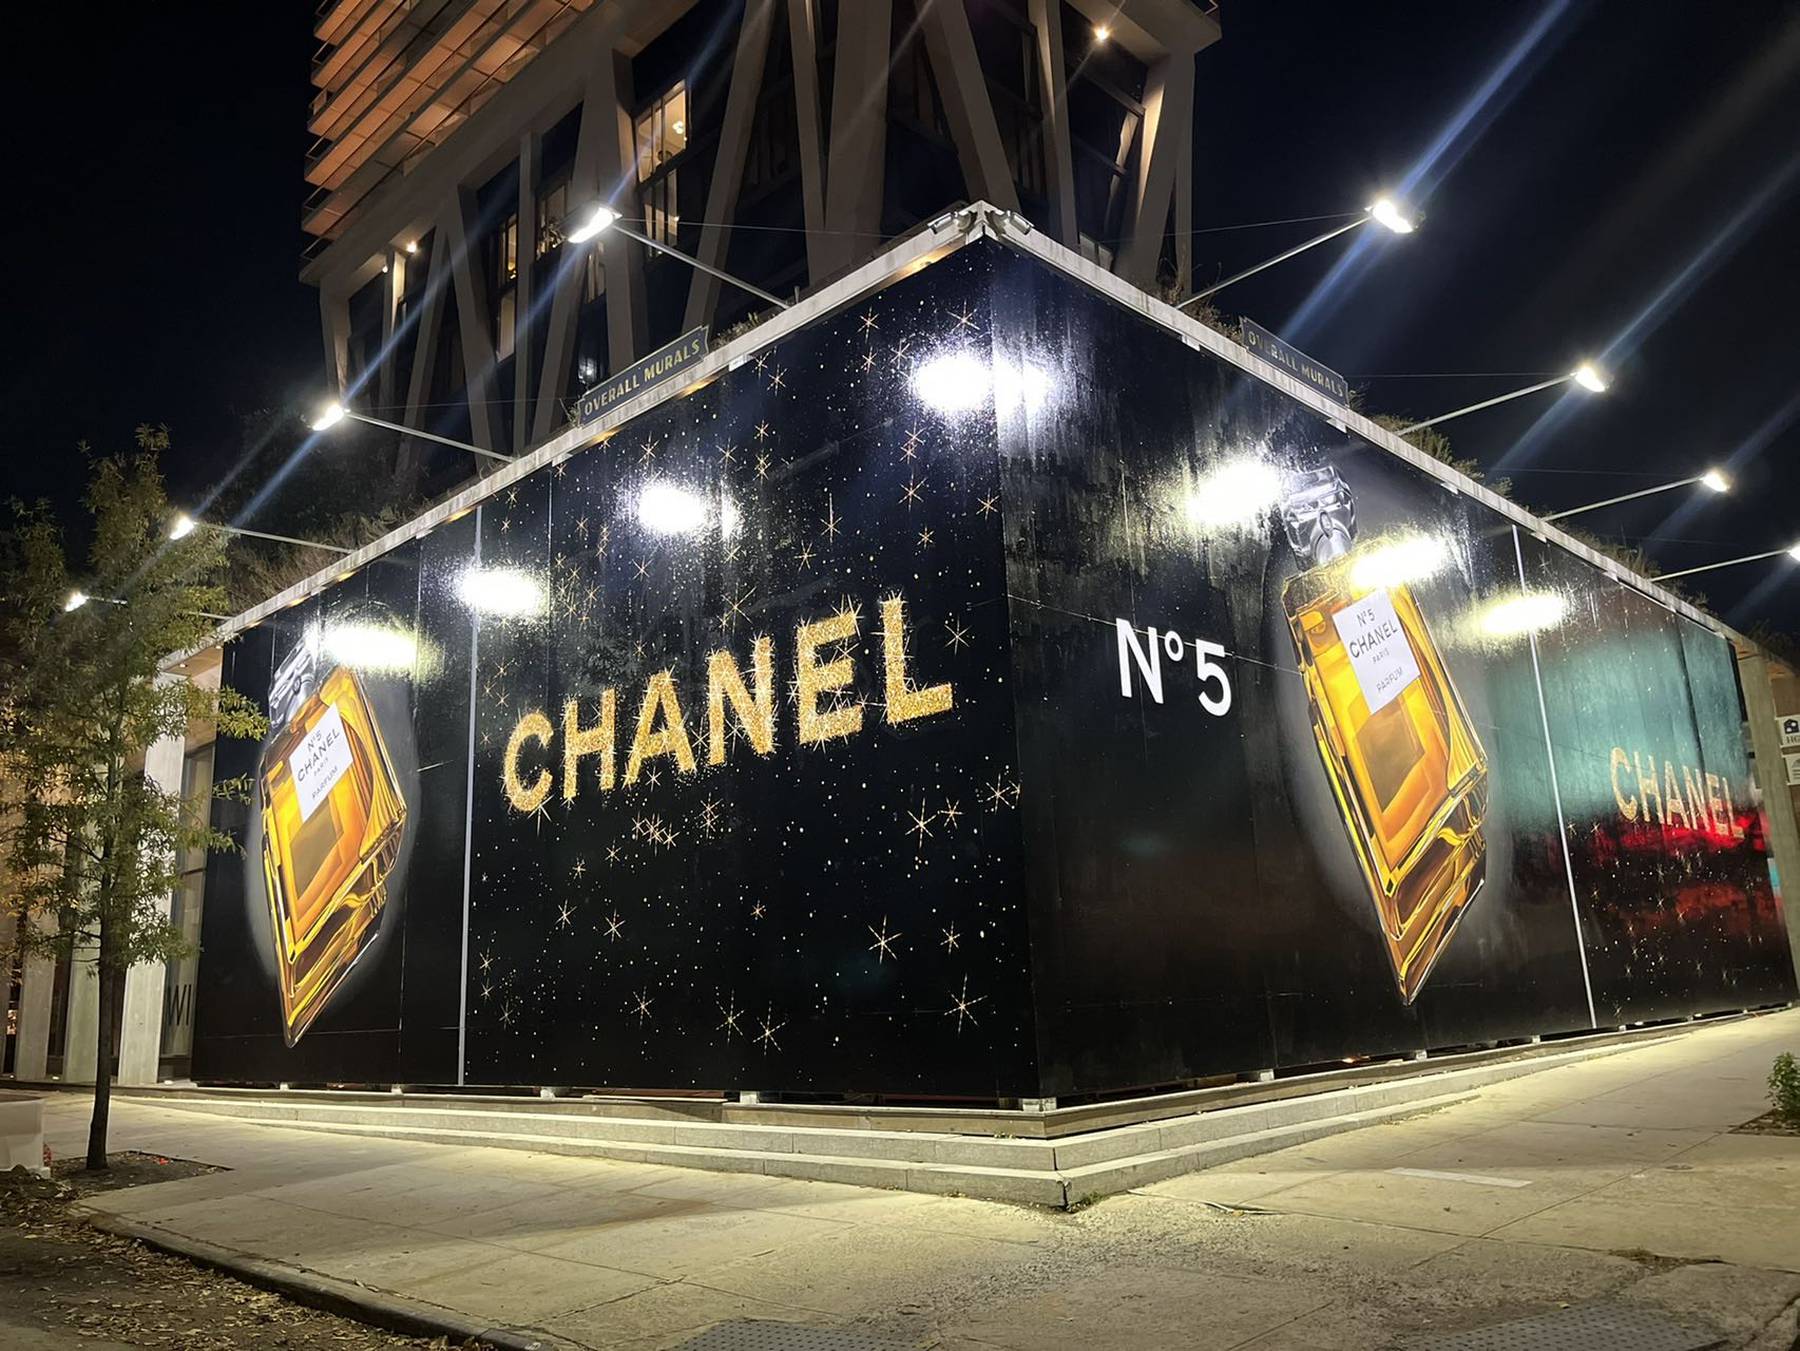 A large advertising billboard for Chanel's No. 5 fragrance at a street corner.